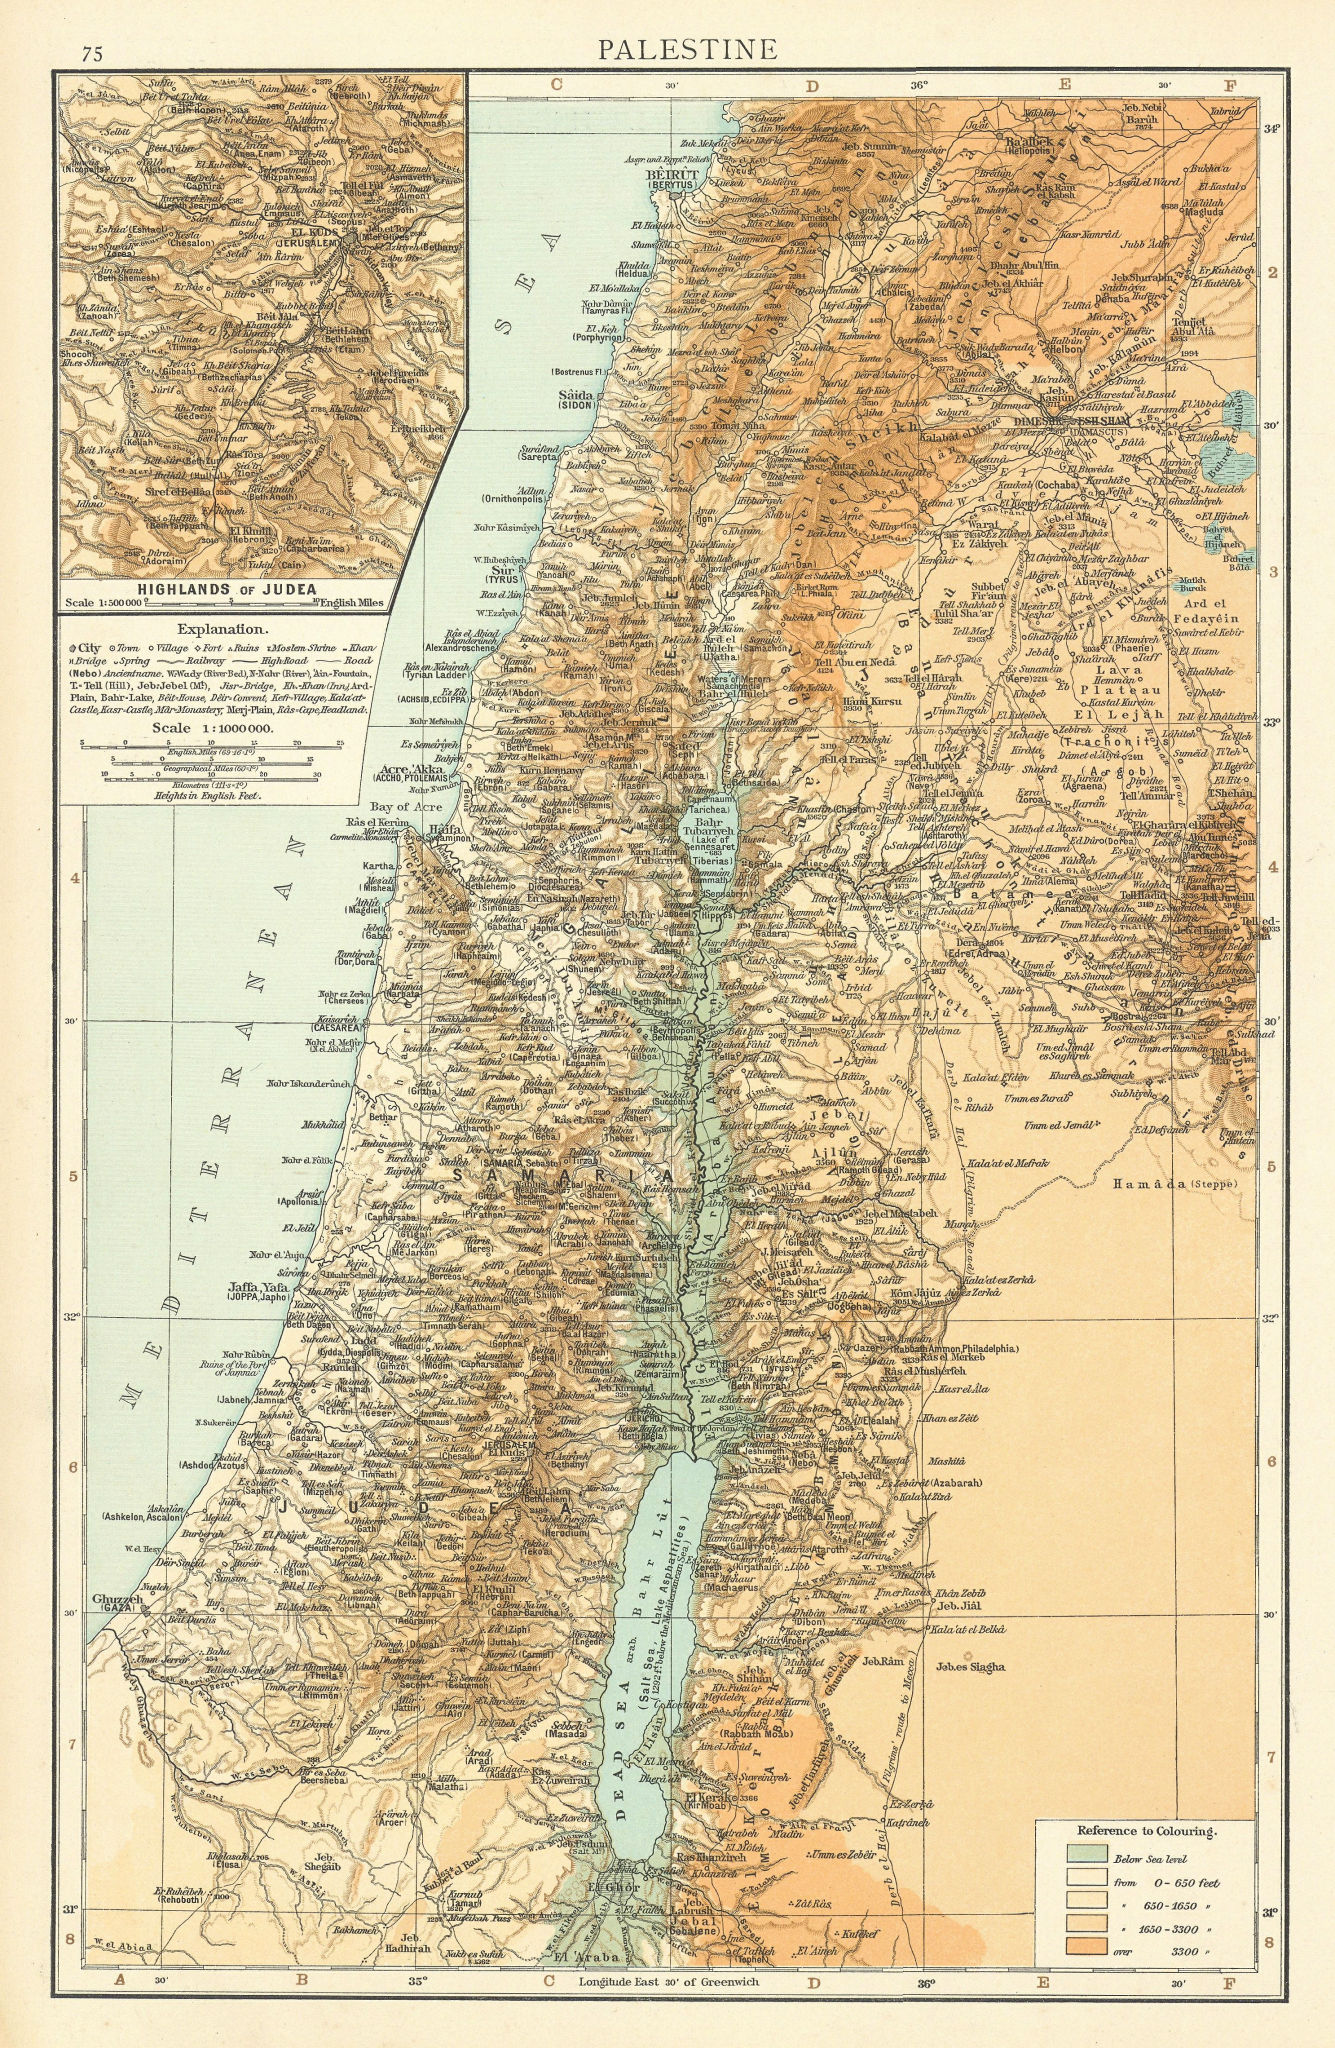 Palestine. Judea highlands. Ancient & Arabic names. Holy land. TIMES 1895 map